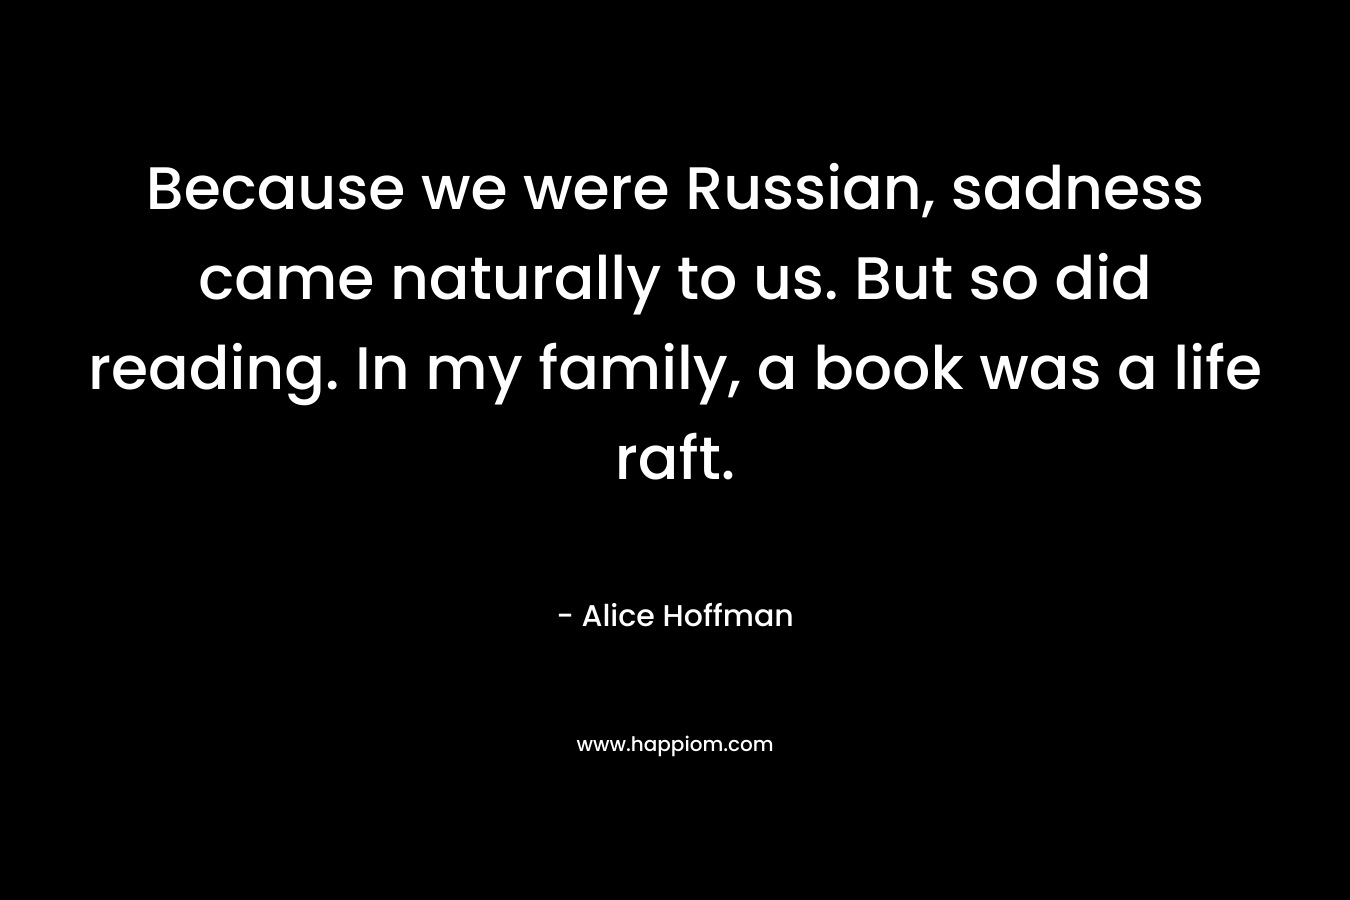 Because we were Russian, sadness came naturally to us. But so did reading. In my family, a book was a life raft. – Alice Hoffman